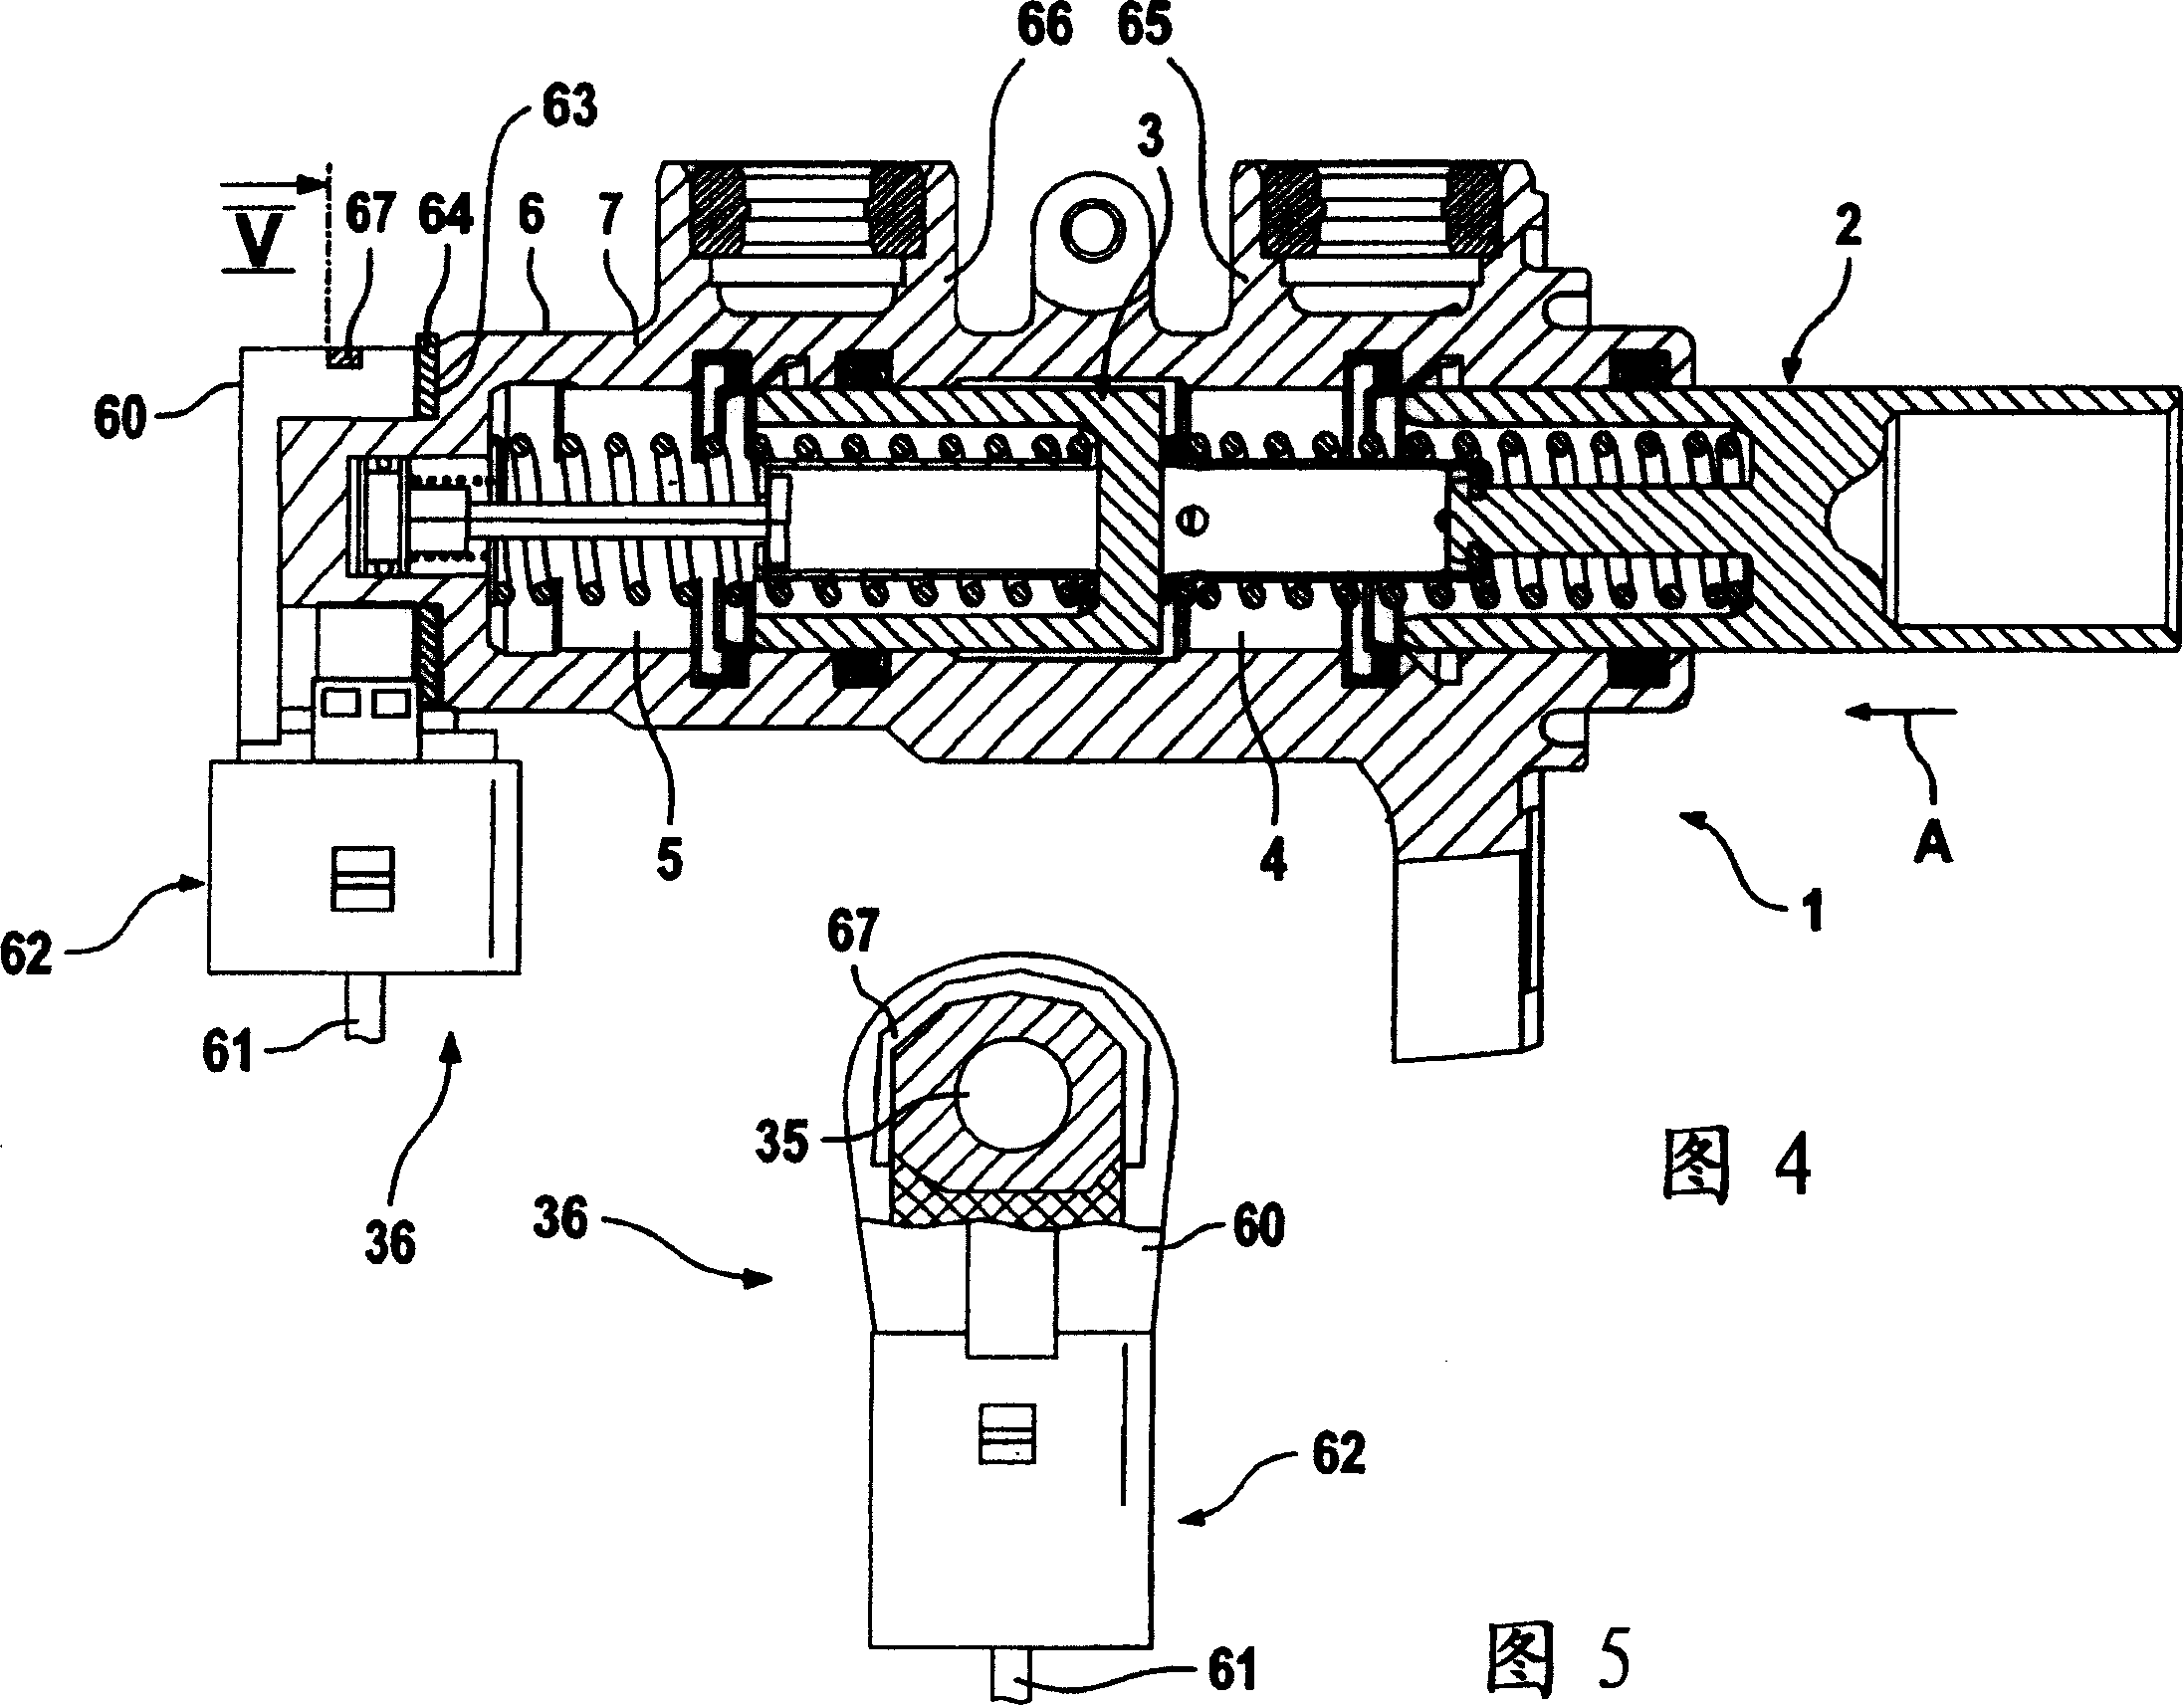 Device for monitoring the position and displacement of a brake pedal.